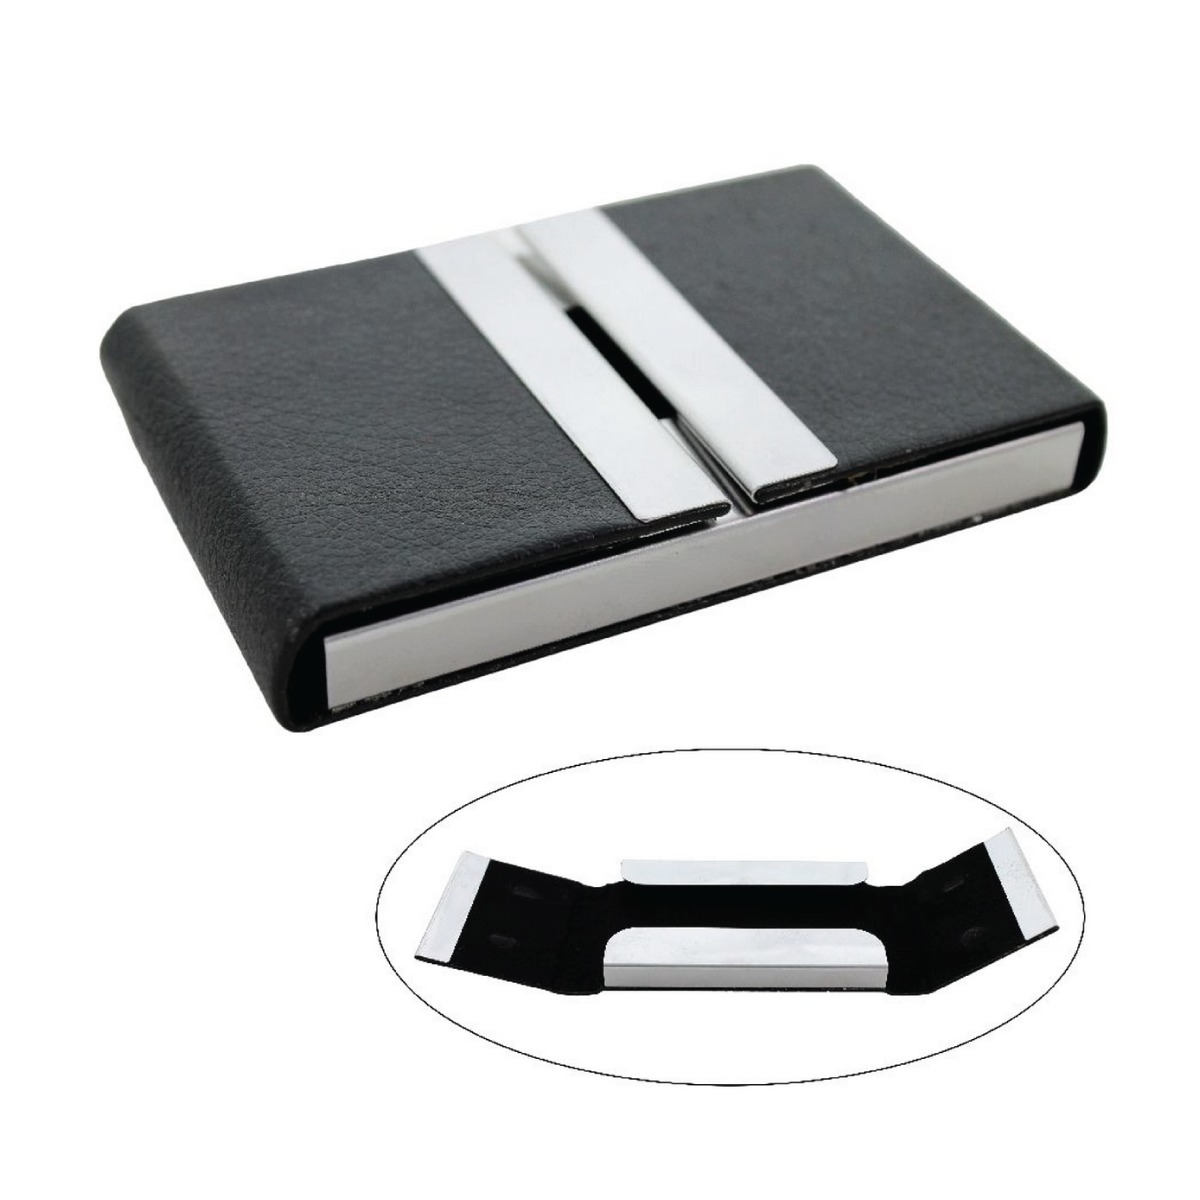 Black Magnetic Business Visiting Card Holder Both Side Open - For Corporate Gifting, Event Gifting, Freebies, Promotions JA15